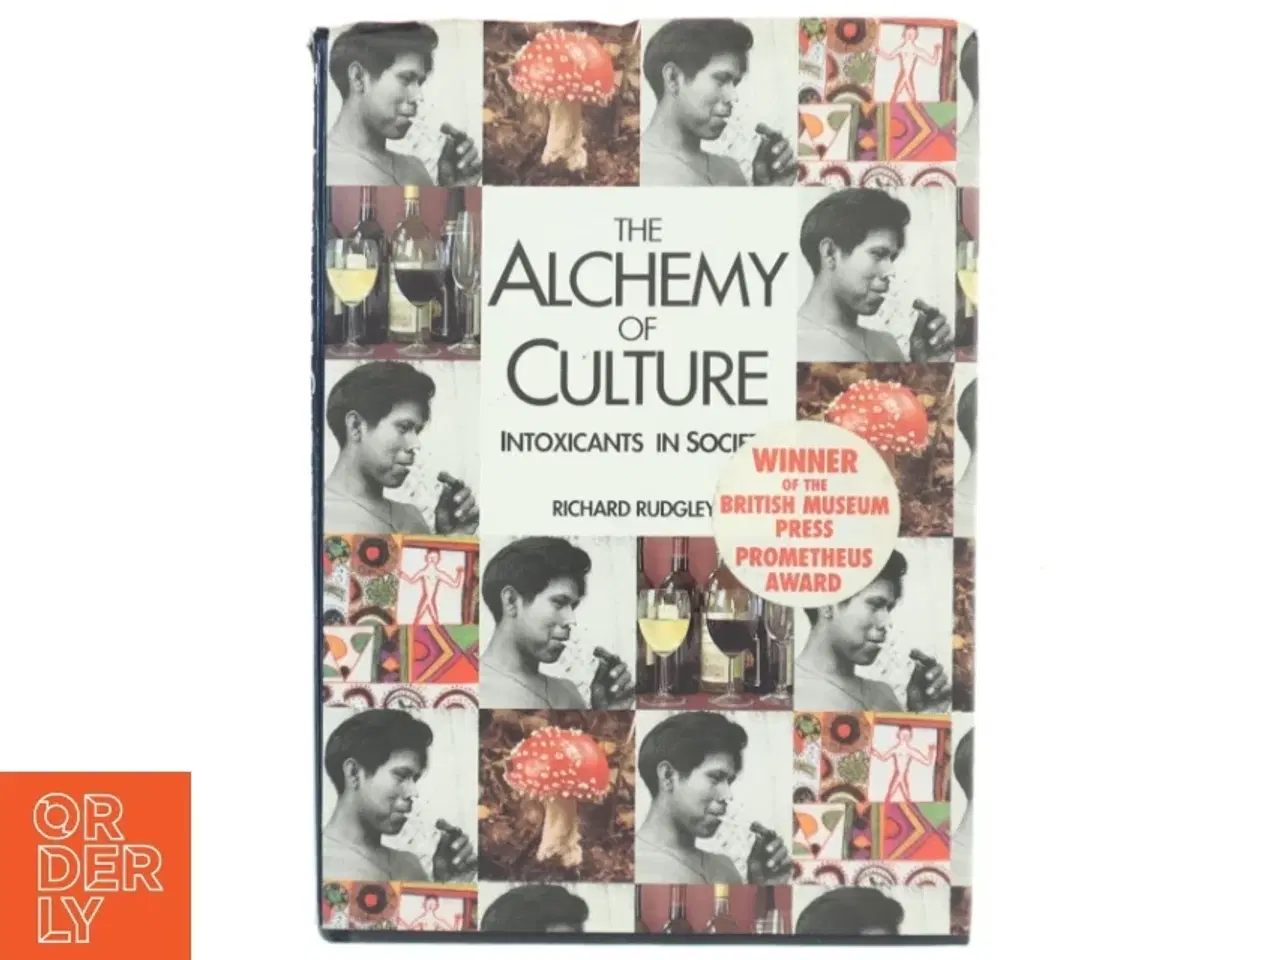 Billede 1 - The alchemy of culture - Intoxicants in society af Richard Rudgly (bog)